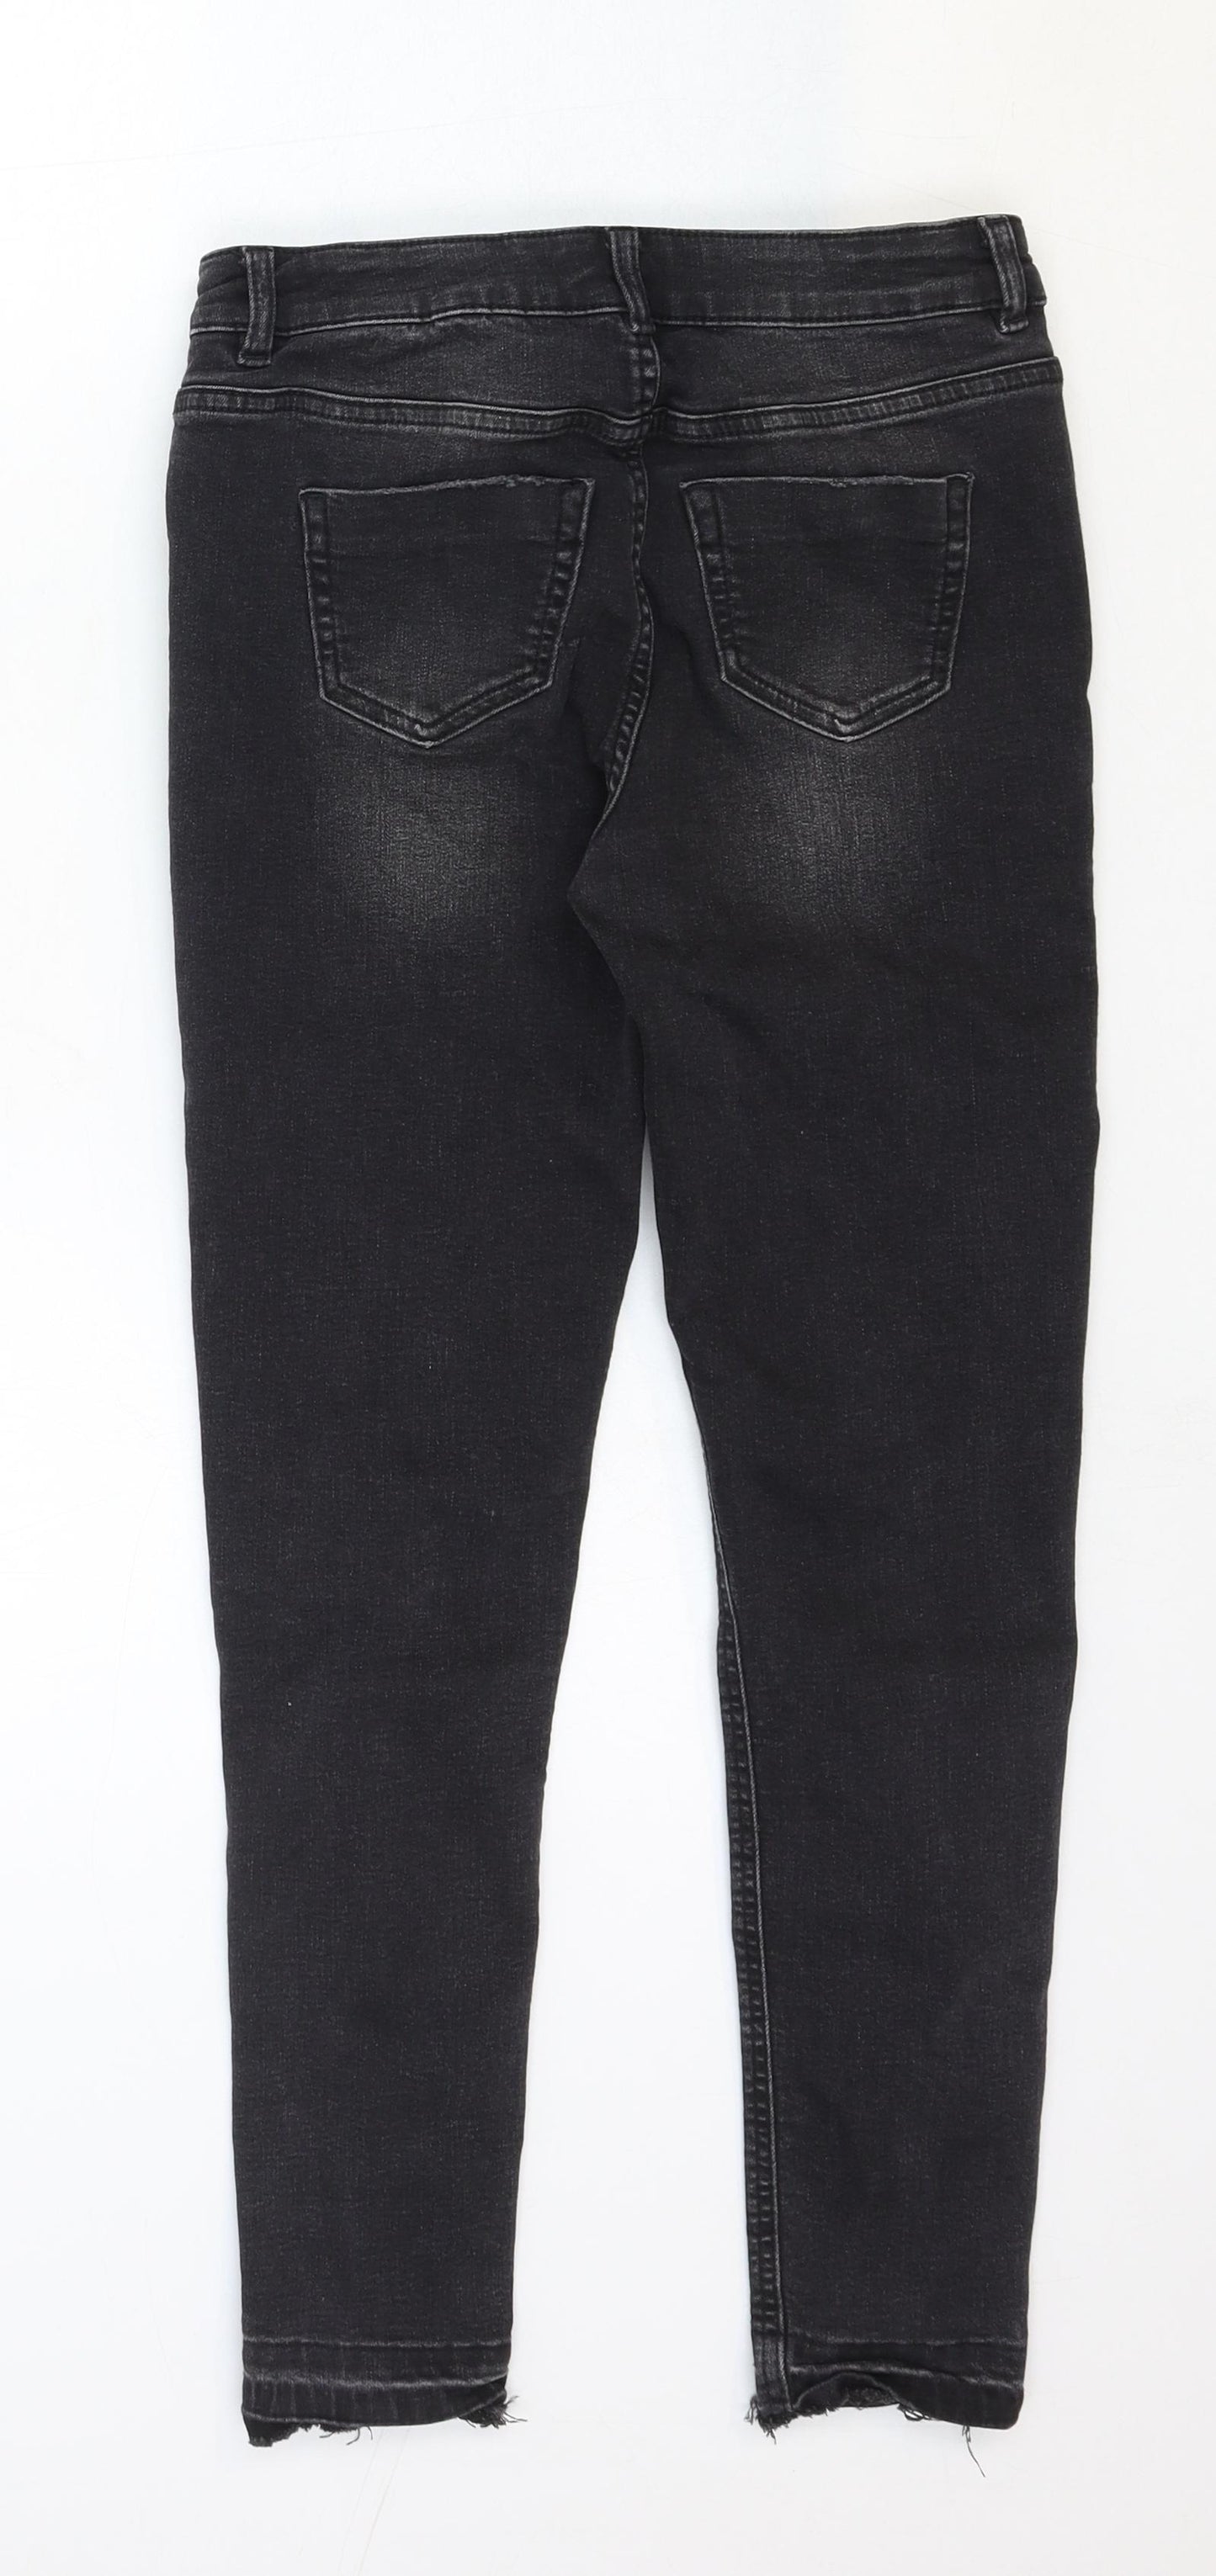 The Mini Ivy Girls Black Cotton Skinny Jeans Size 11-12 Years Regular Zip - Distressed